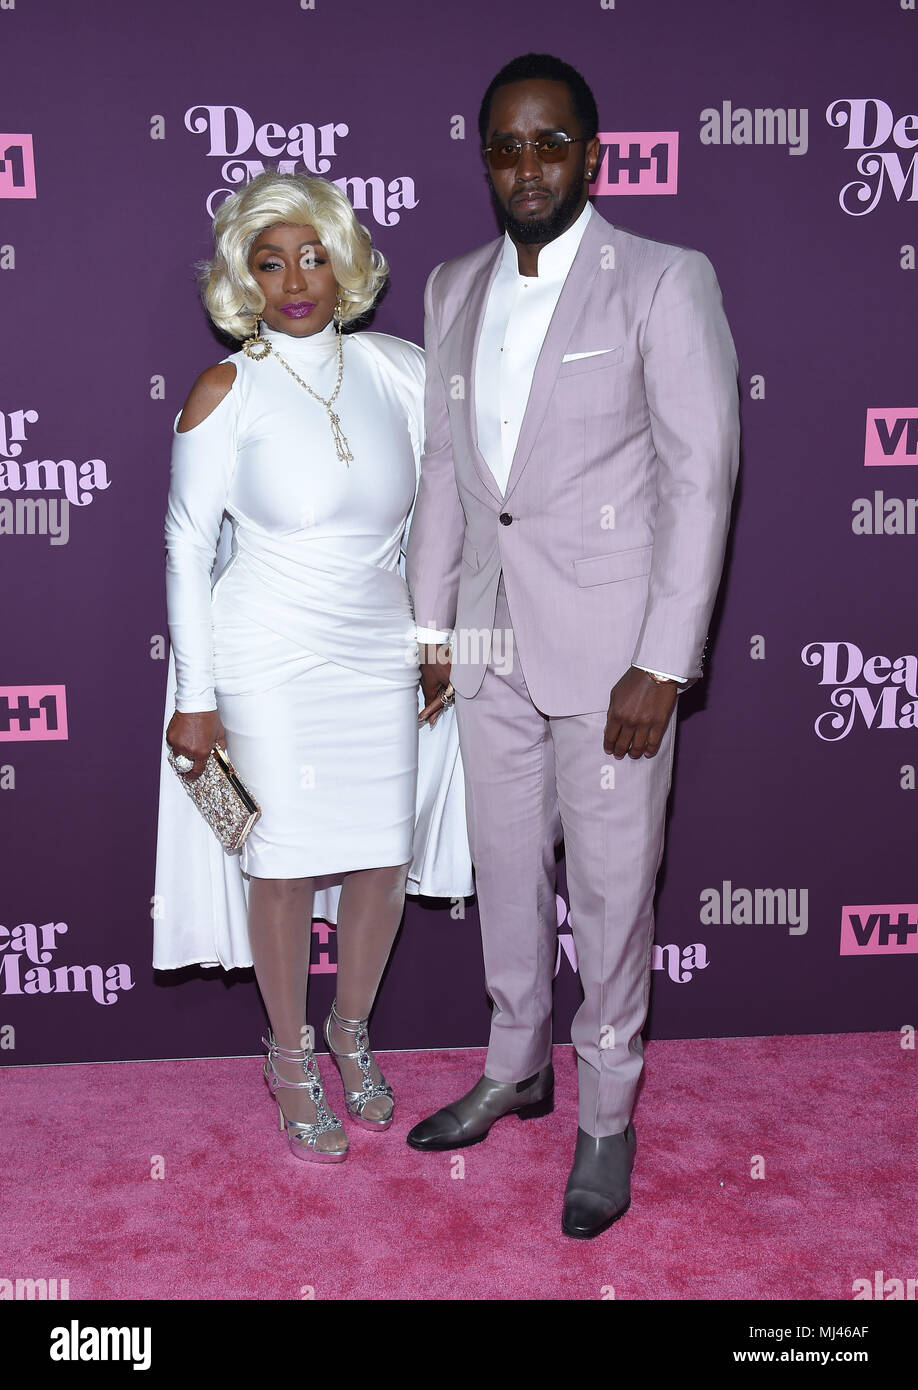 Los Angeles, California, USA. 3rd May, 2018. Sean Diddy Combs and Janice Combs arrives for the VH1's 3rd Annual 'Dear Mama: A Love Letter to Moms' at the Theatre at the Ace Hotel. Credit: Lisa O'Connor/ZUMA Wire/Alamy Live News Stock Photo